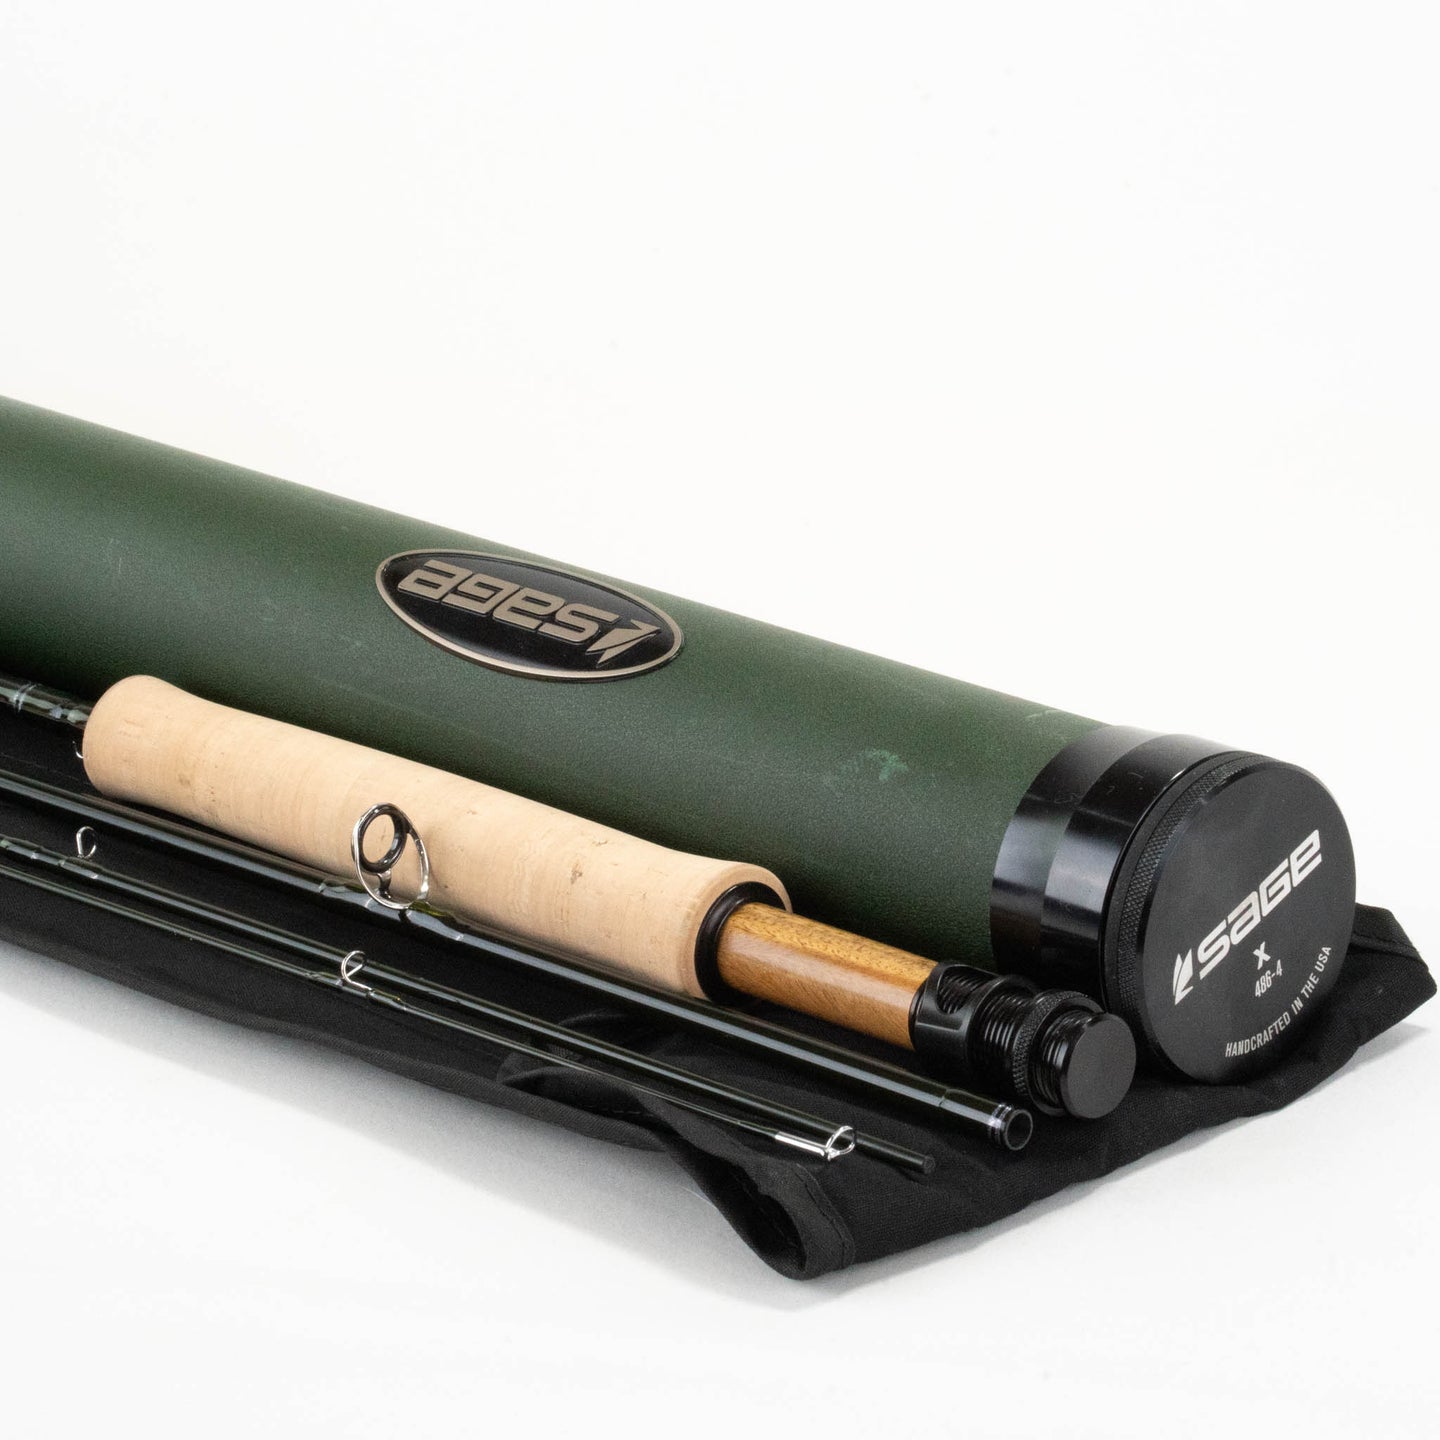 Sage X 486-4 Fly Rod - 4wt 8ft 6in 4pc